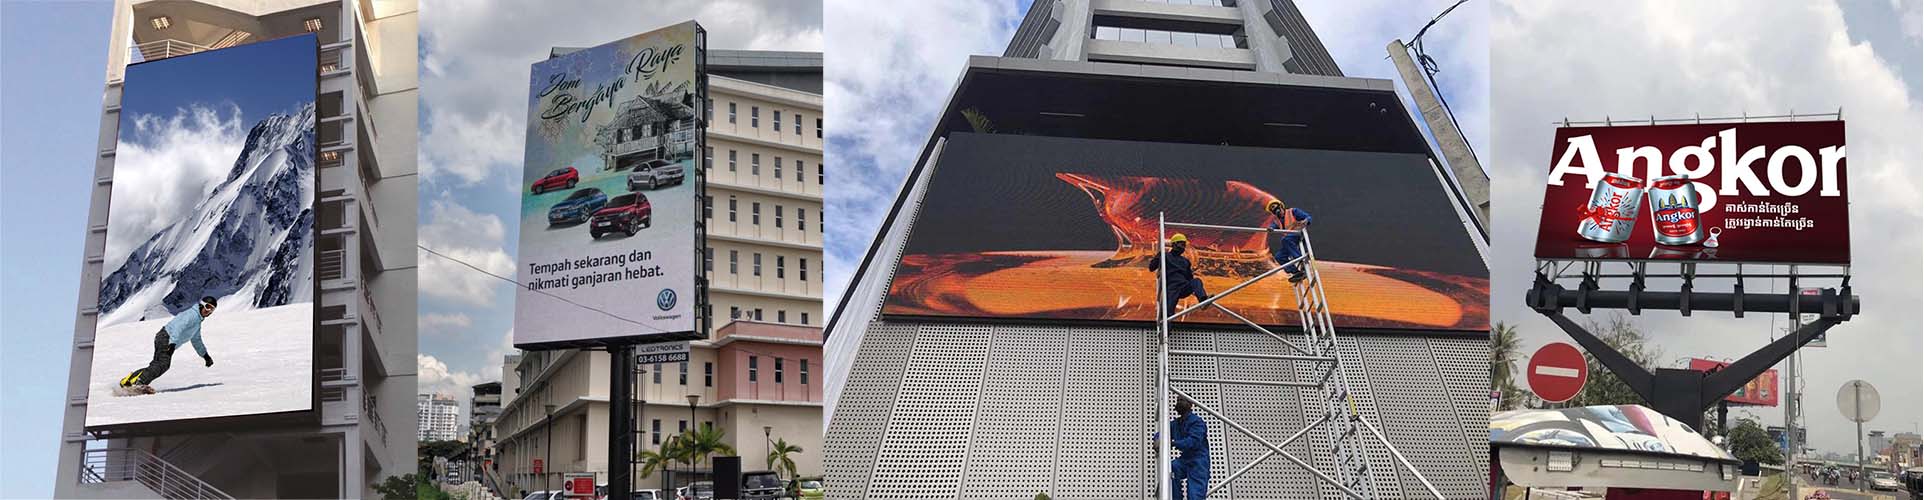 Outdoor-LED-screen-banner